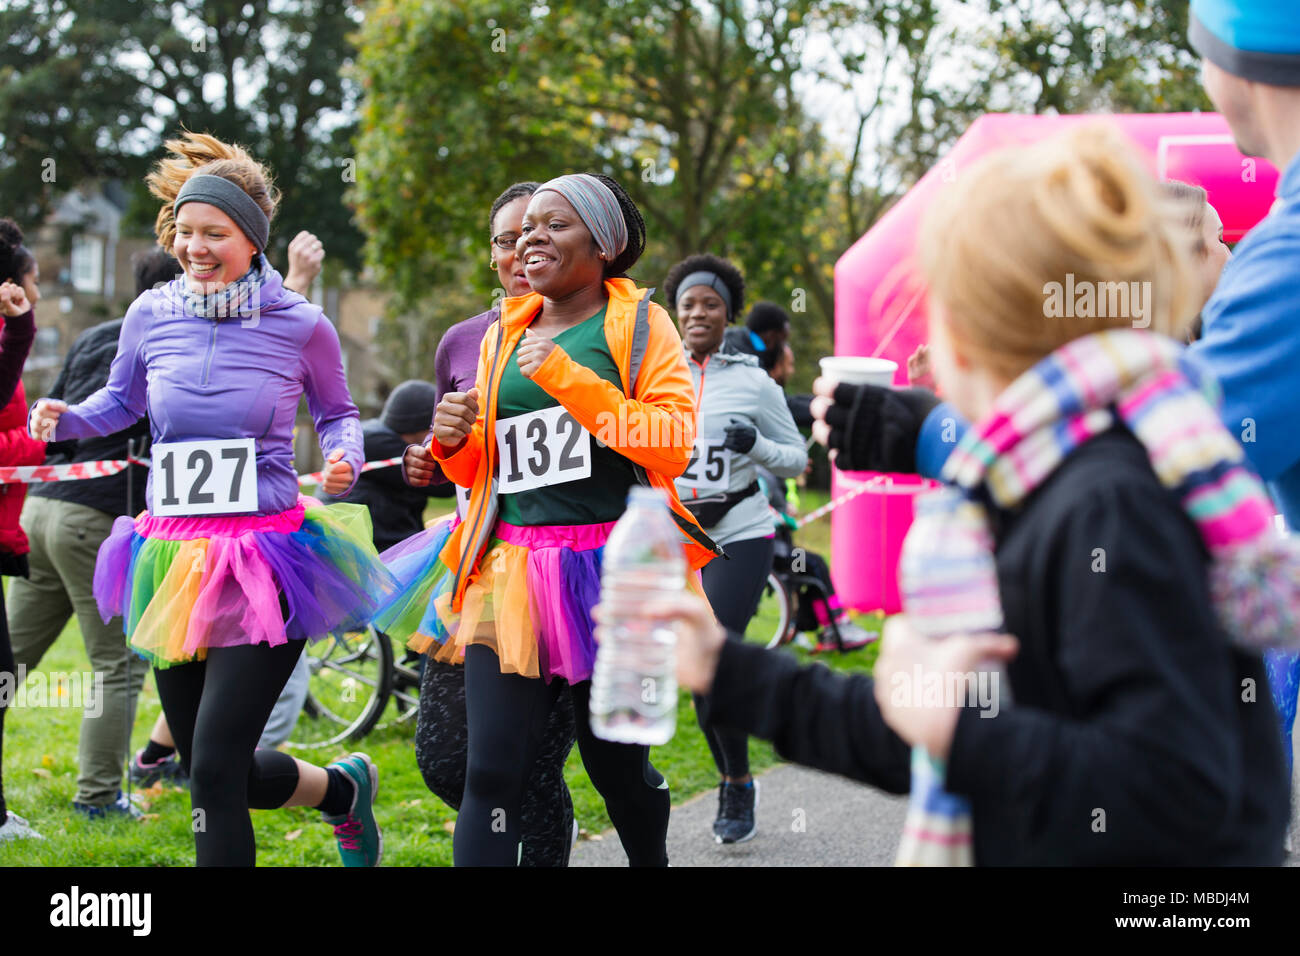 Female runners in tutus running at charity race in park Stock Photo